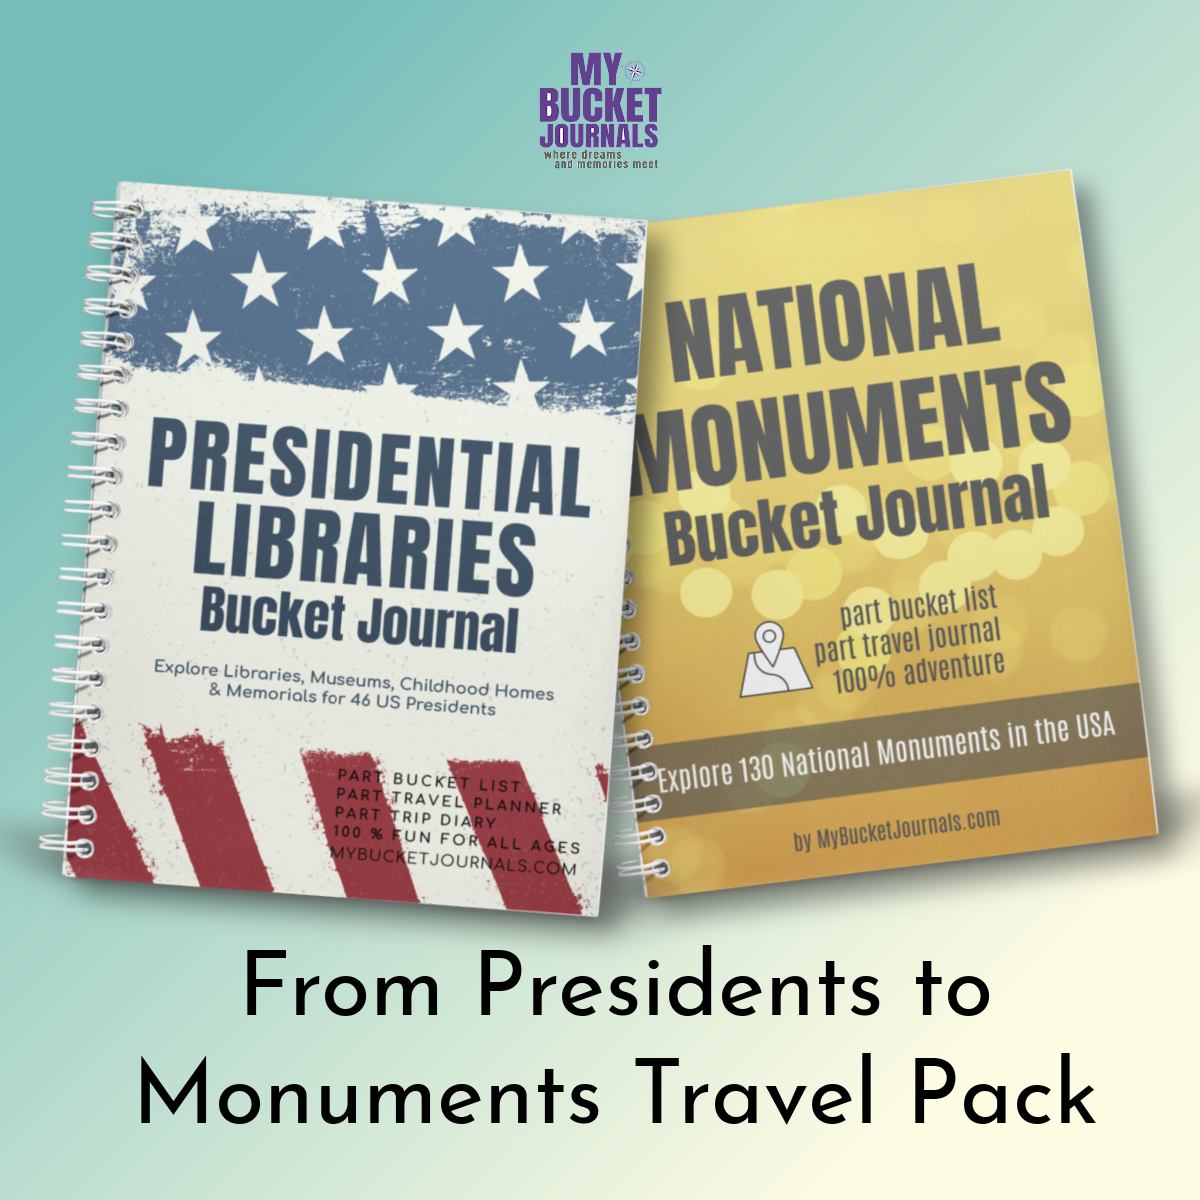 From Presidents to Monuments Travel Pack